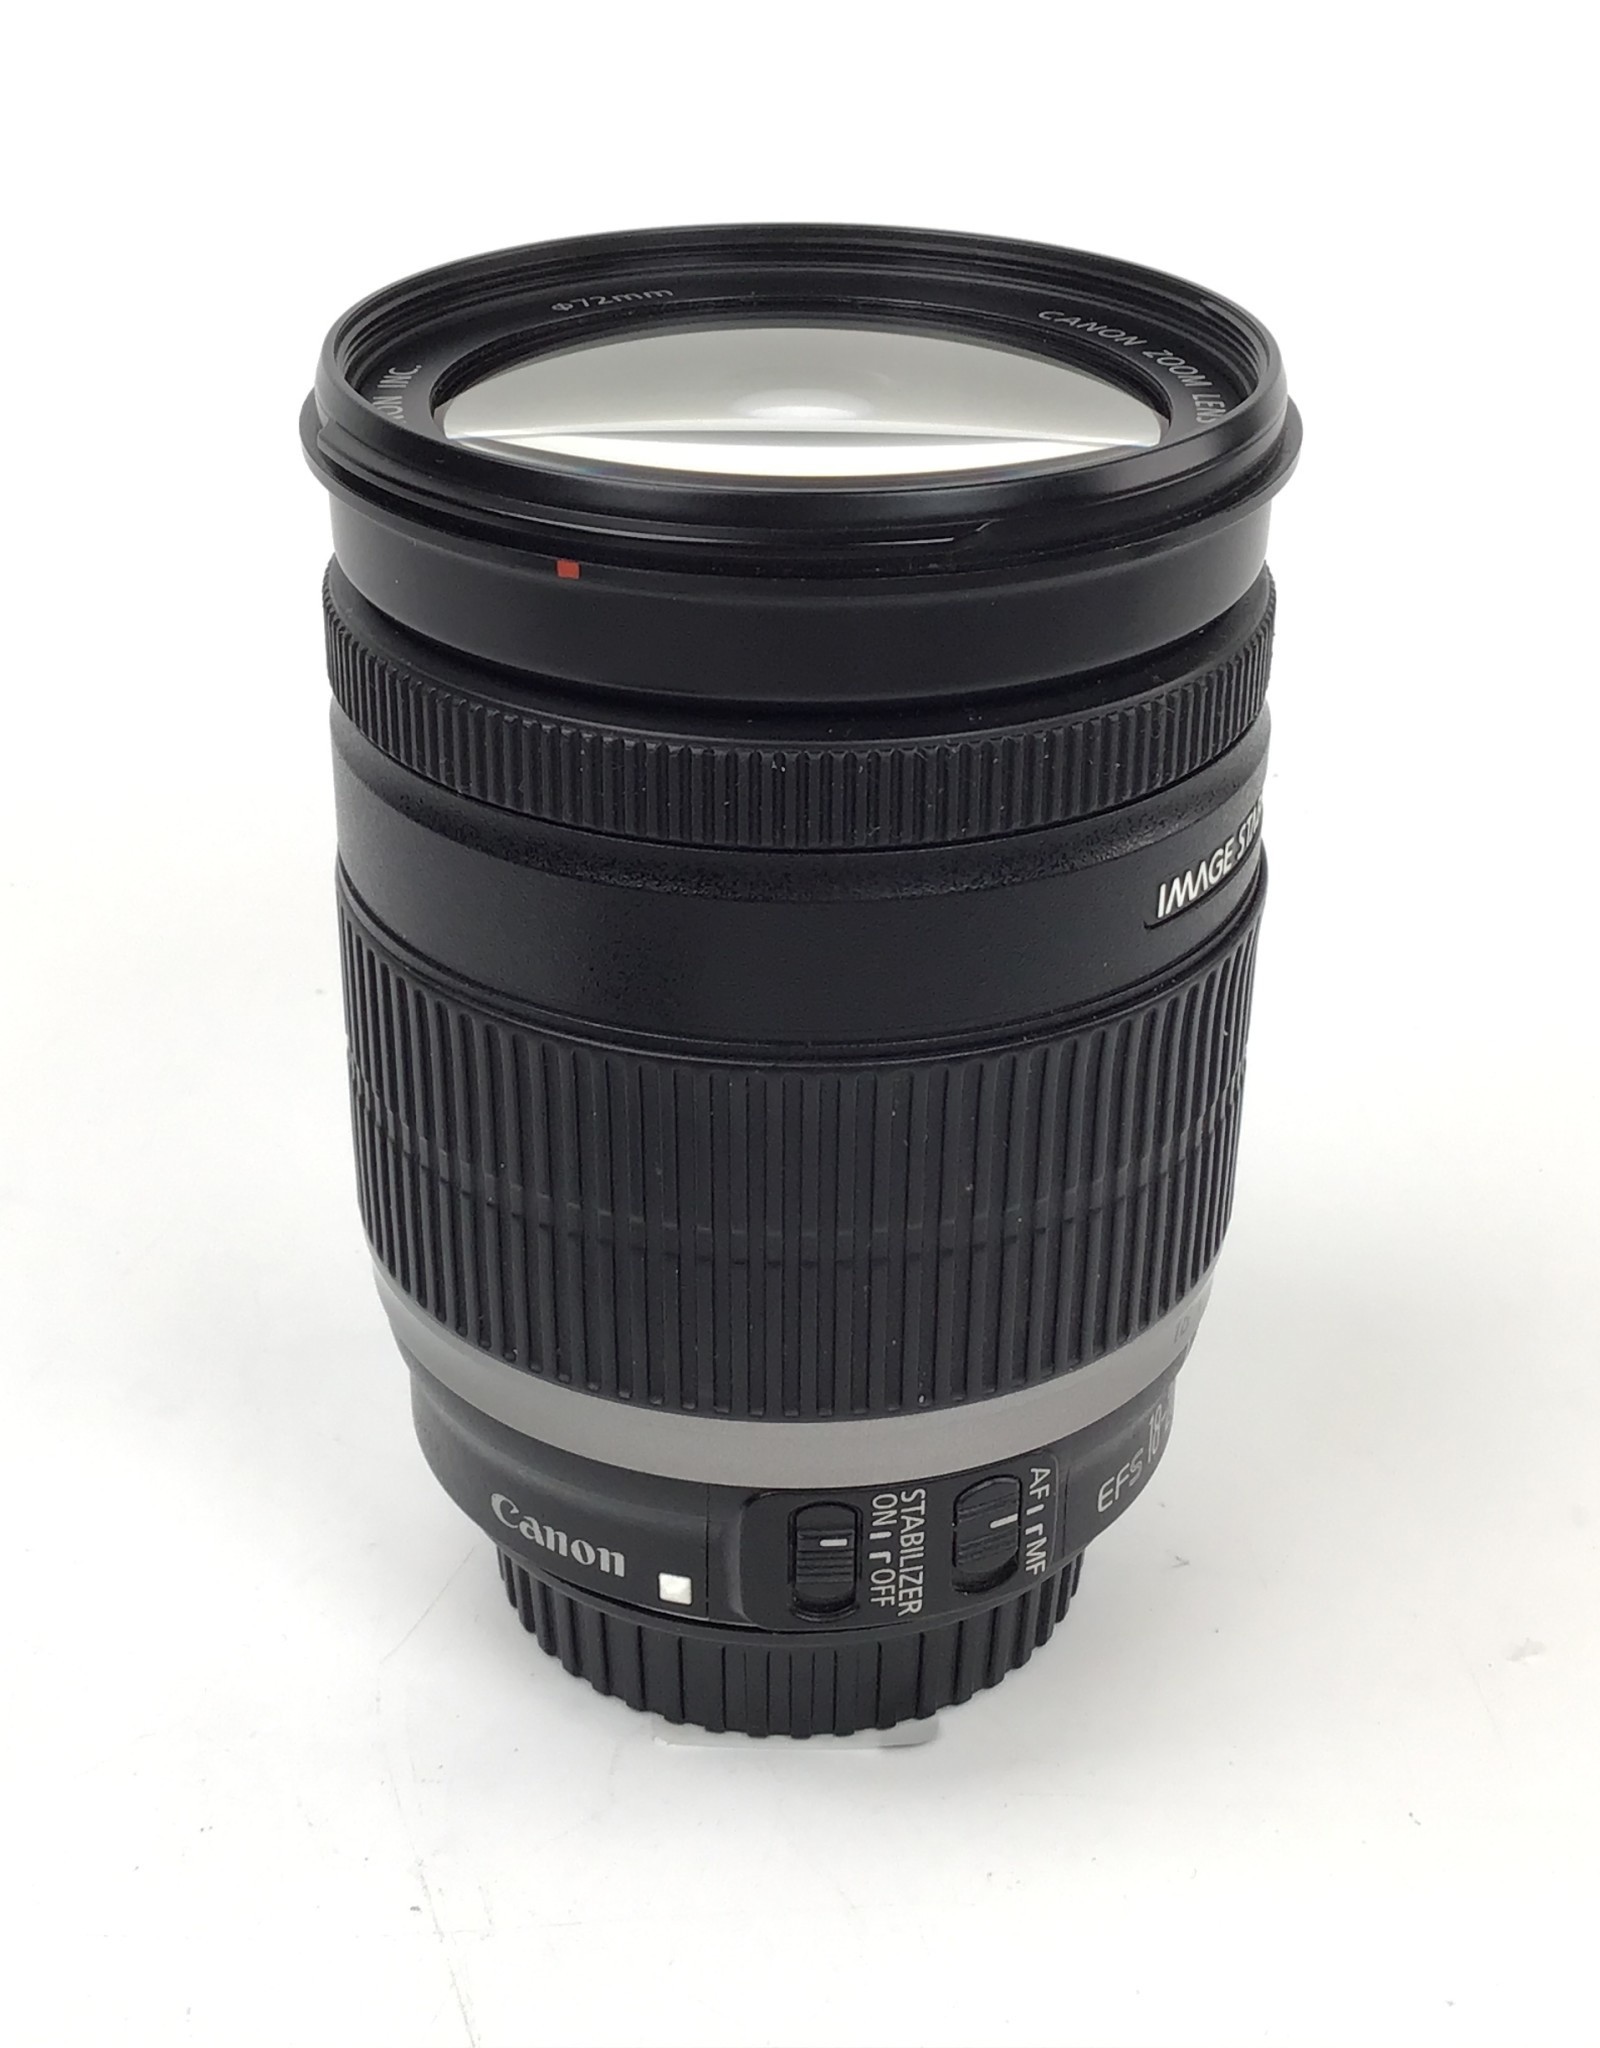 CANON Canon EF-S 18-200mm f3.5-5.6 IS Lens Used Good